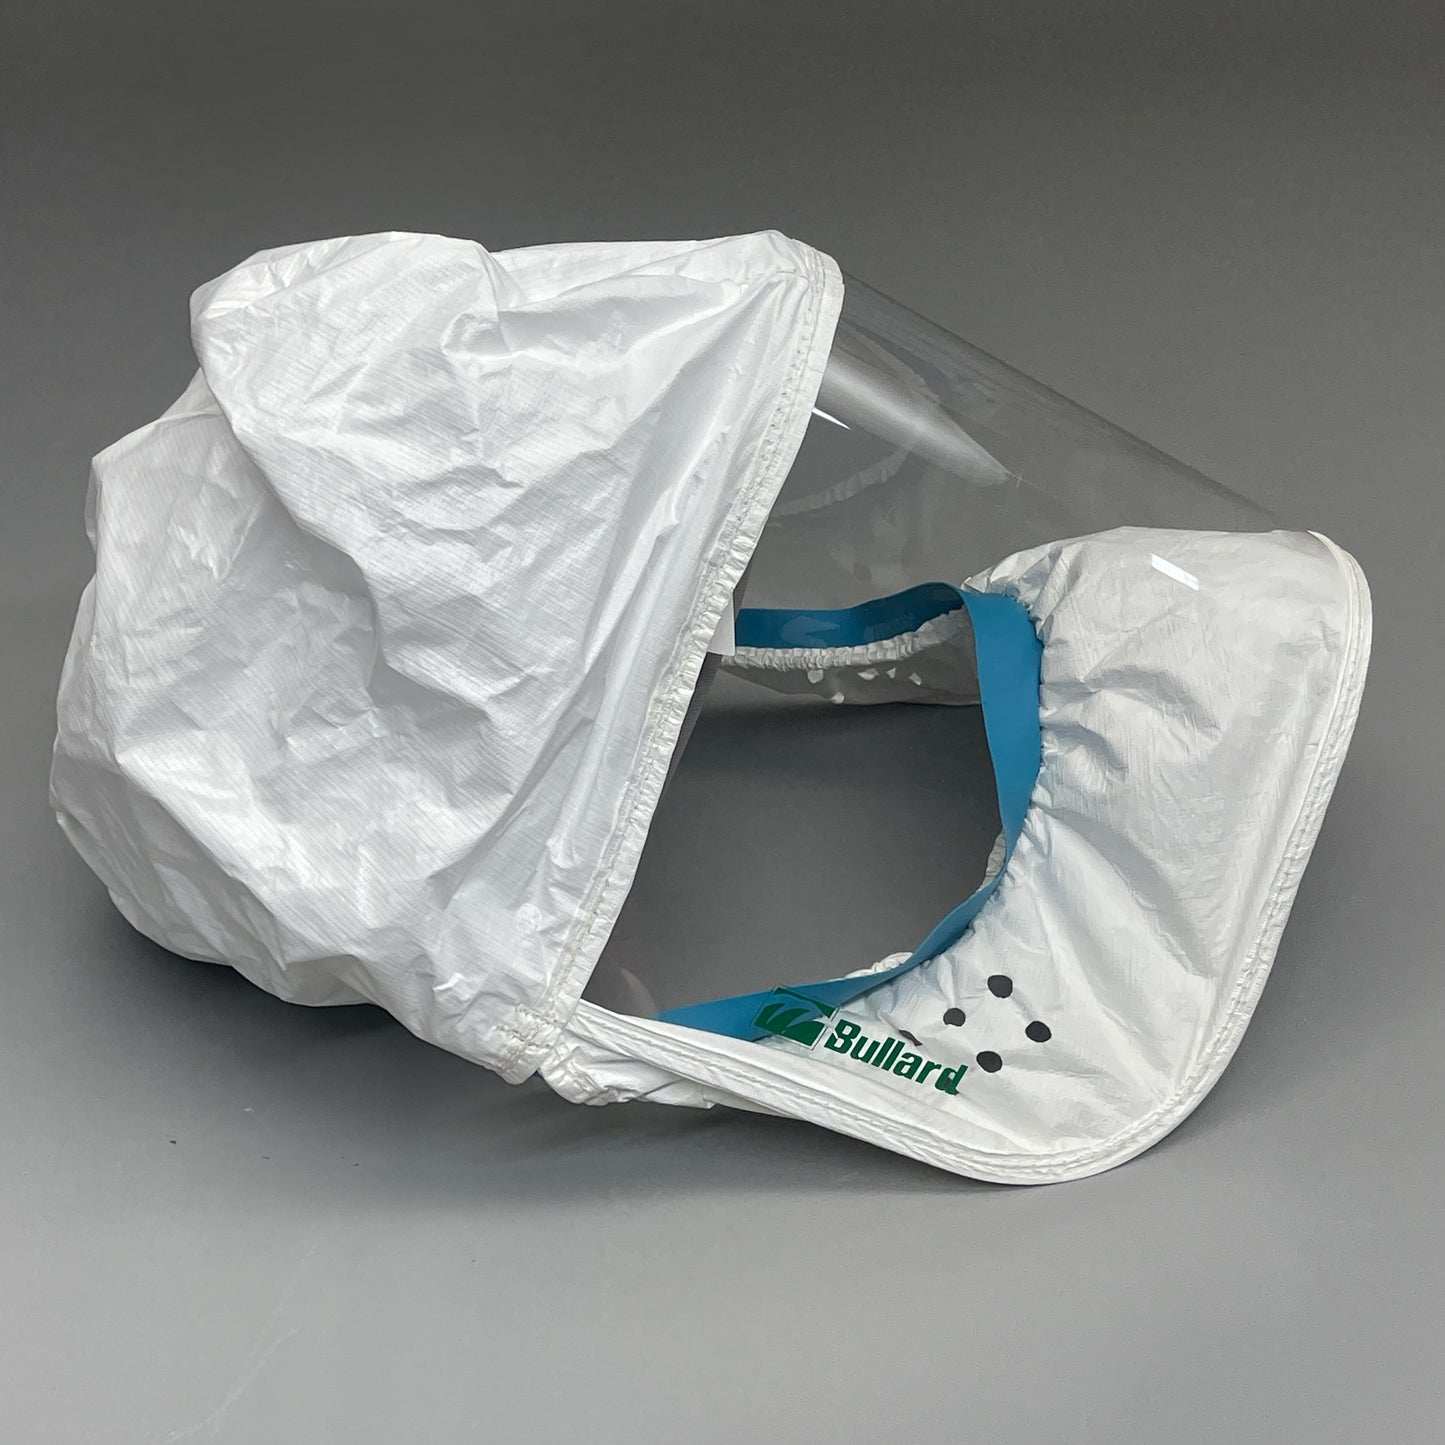 BULLARD (2 PACK) Respirator Hood FacePiece Large 20LFL (for CC20 or PA20/PA30) 8/2011 (New / Old Stock)